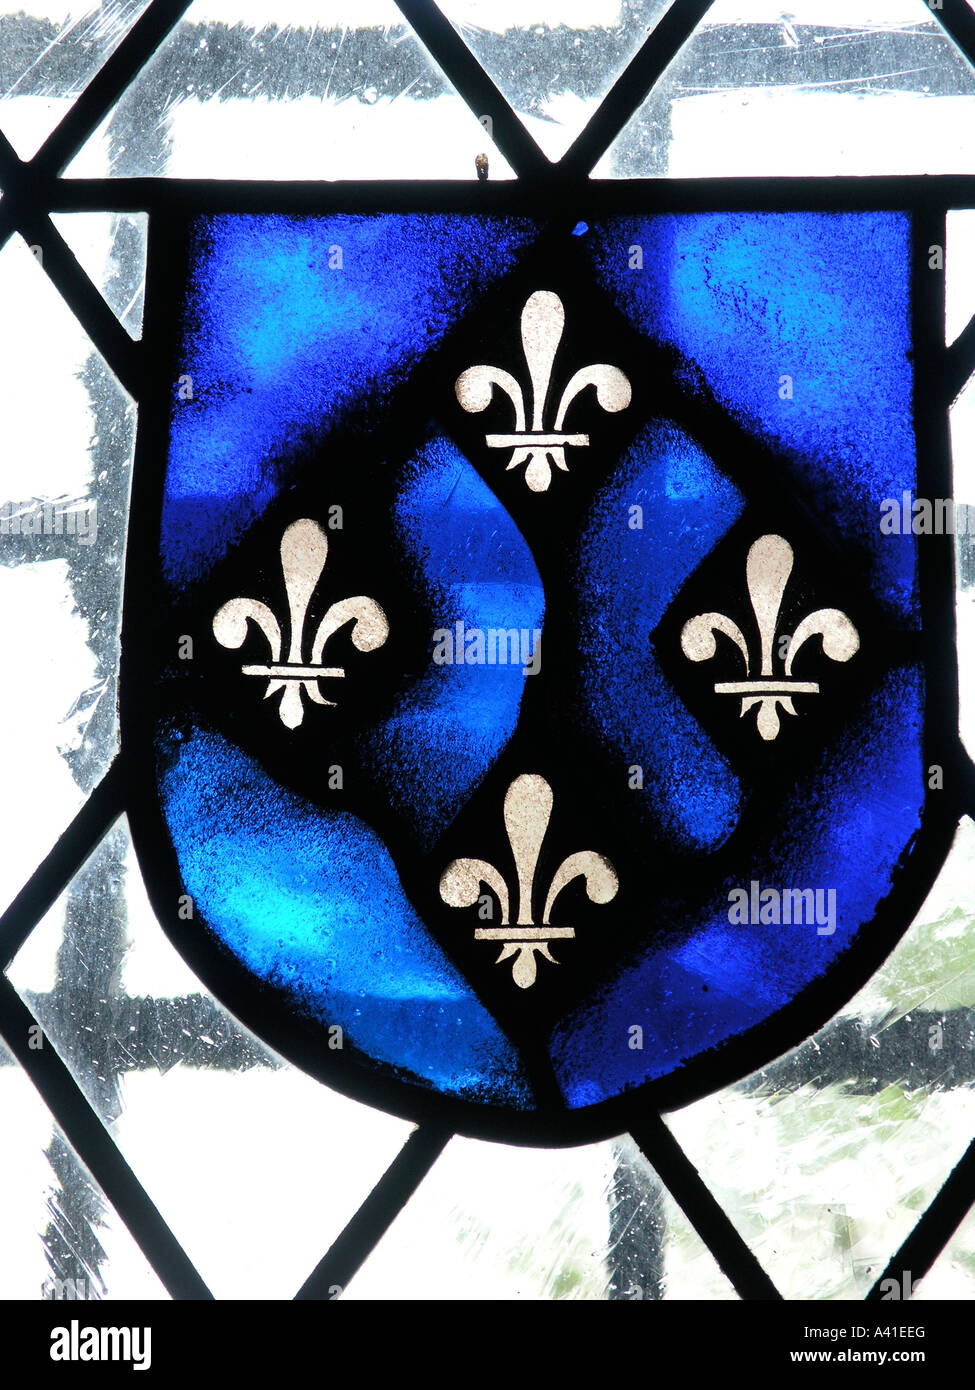 Stained glass fleur de lis symbol in an old castle Stock Photo